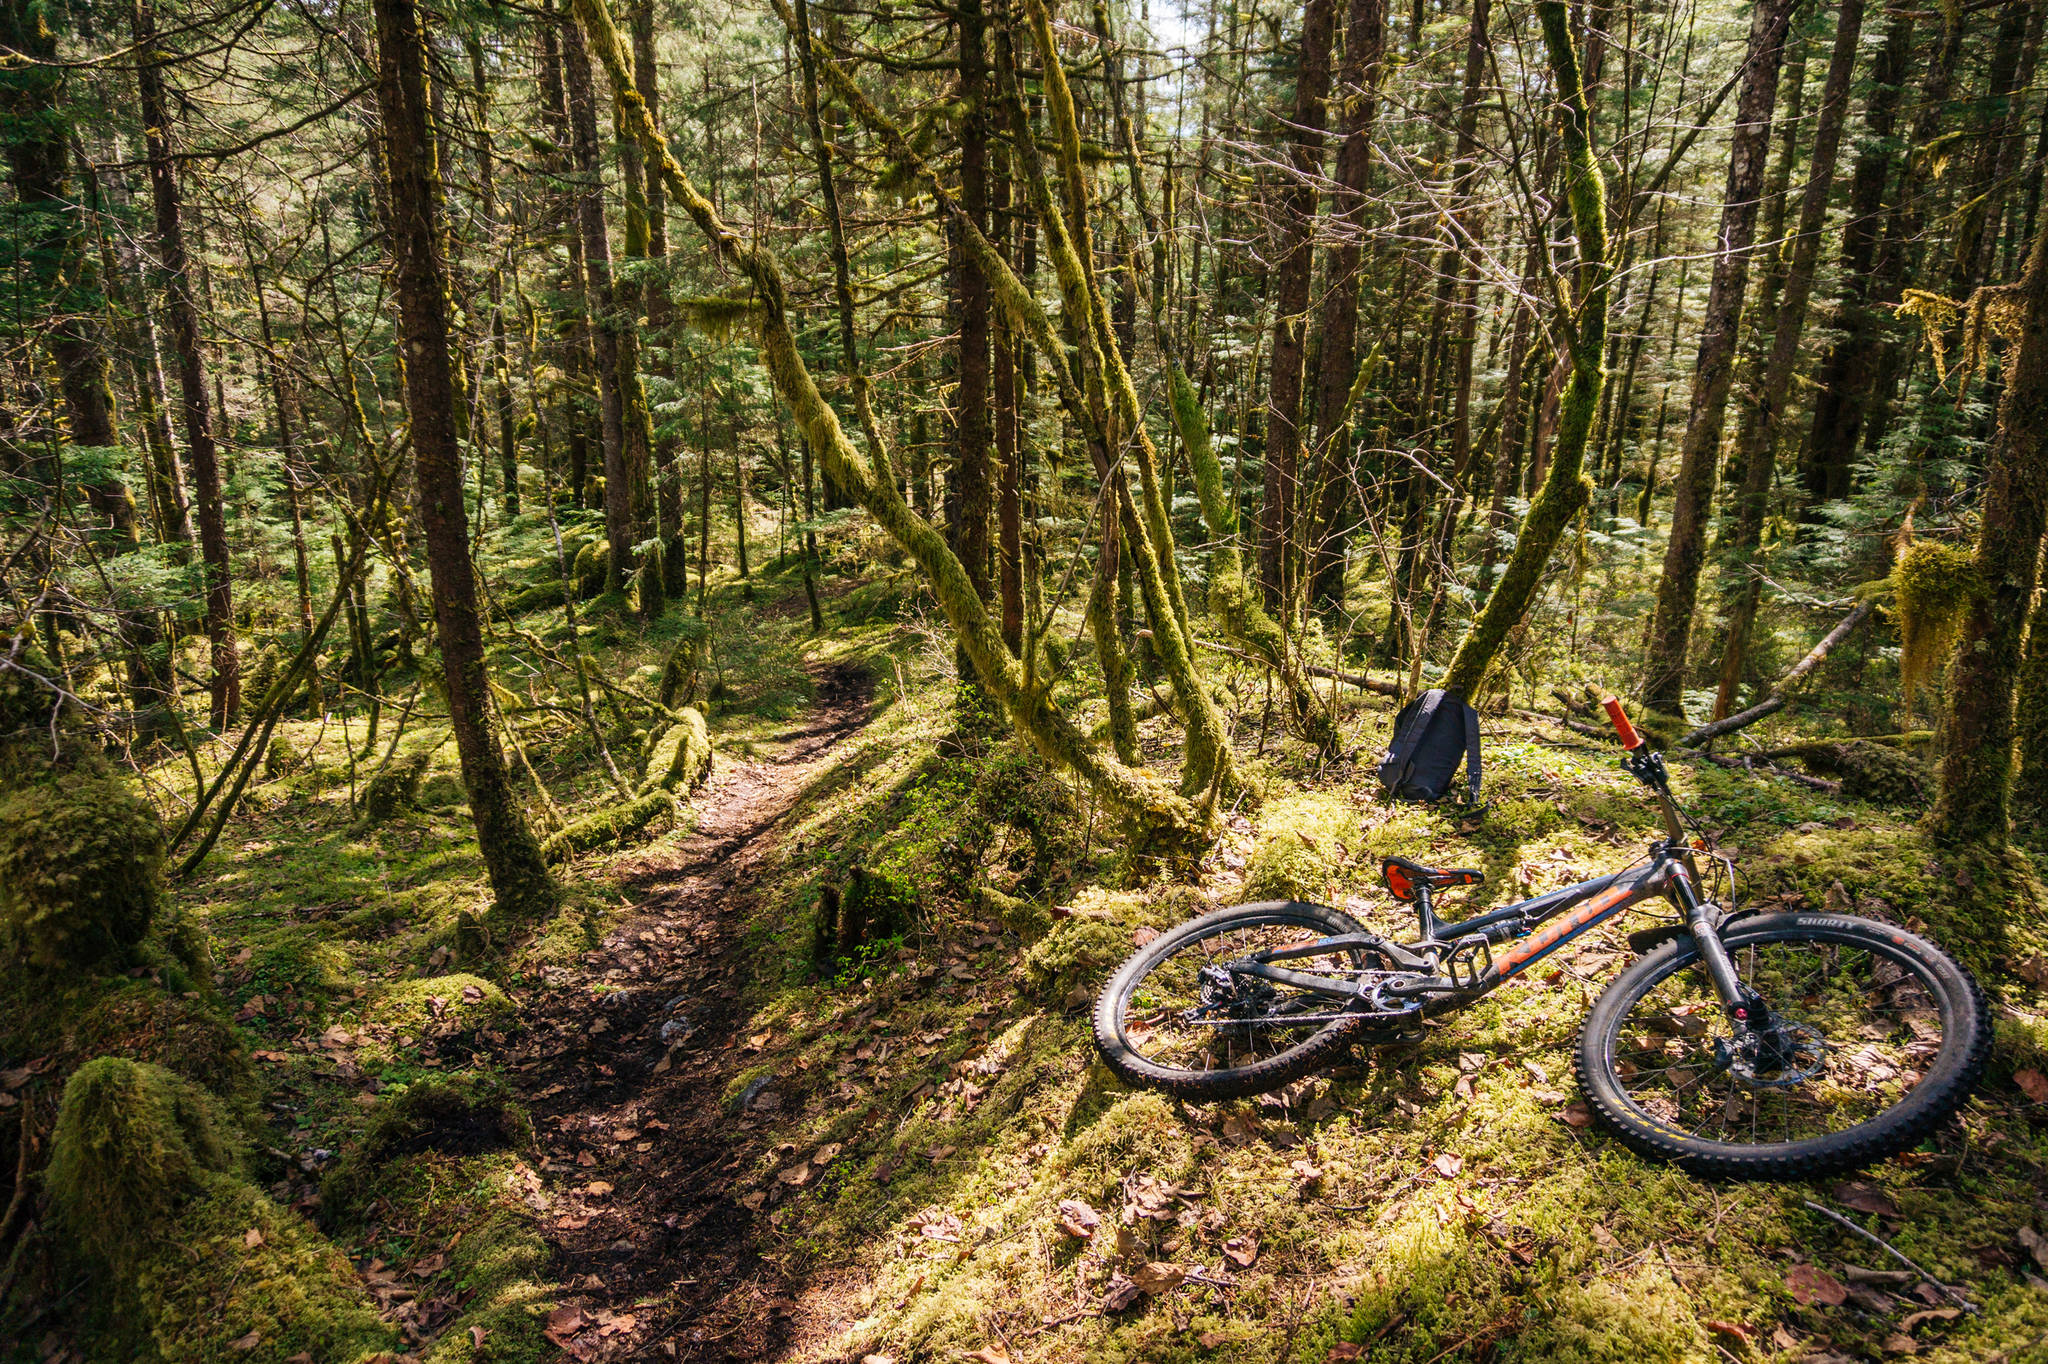 Taking a break. Bike off the side of the trail. (Gabe Donohoe | For the Juneau Empire)